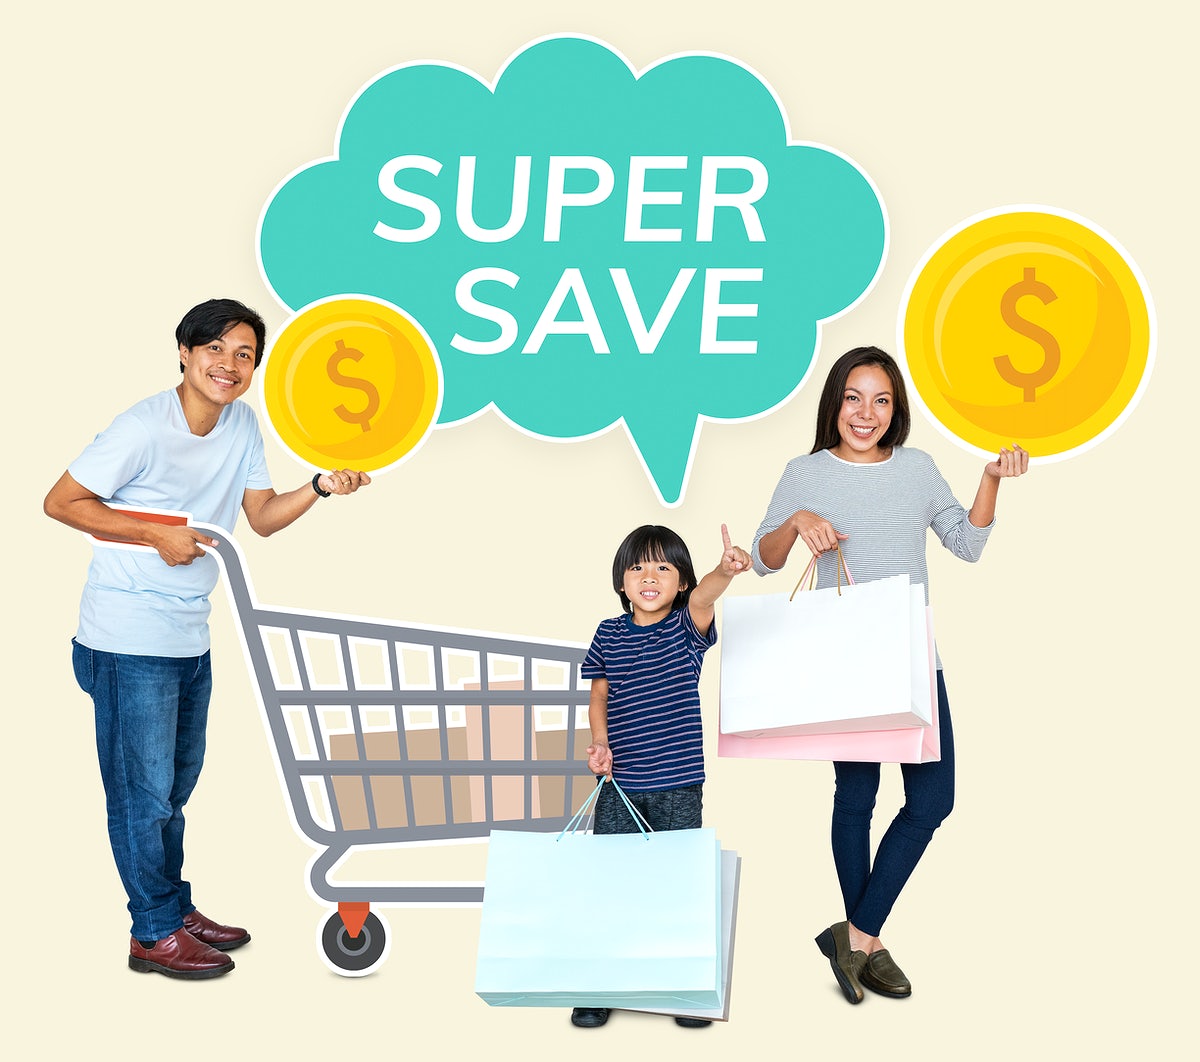 Free Family With A Super Saver Deal